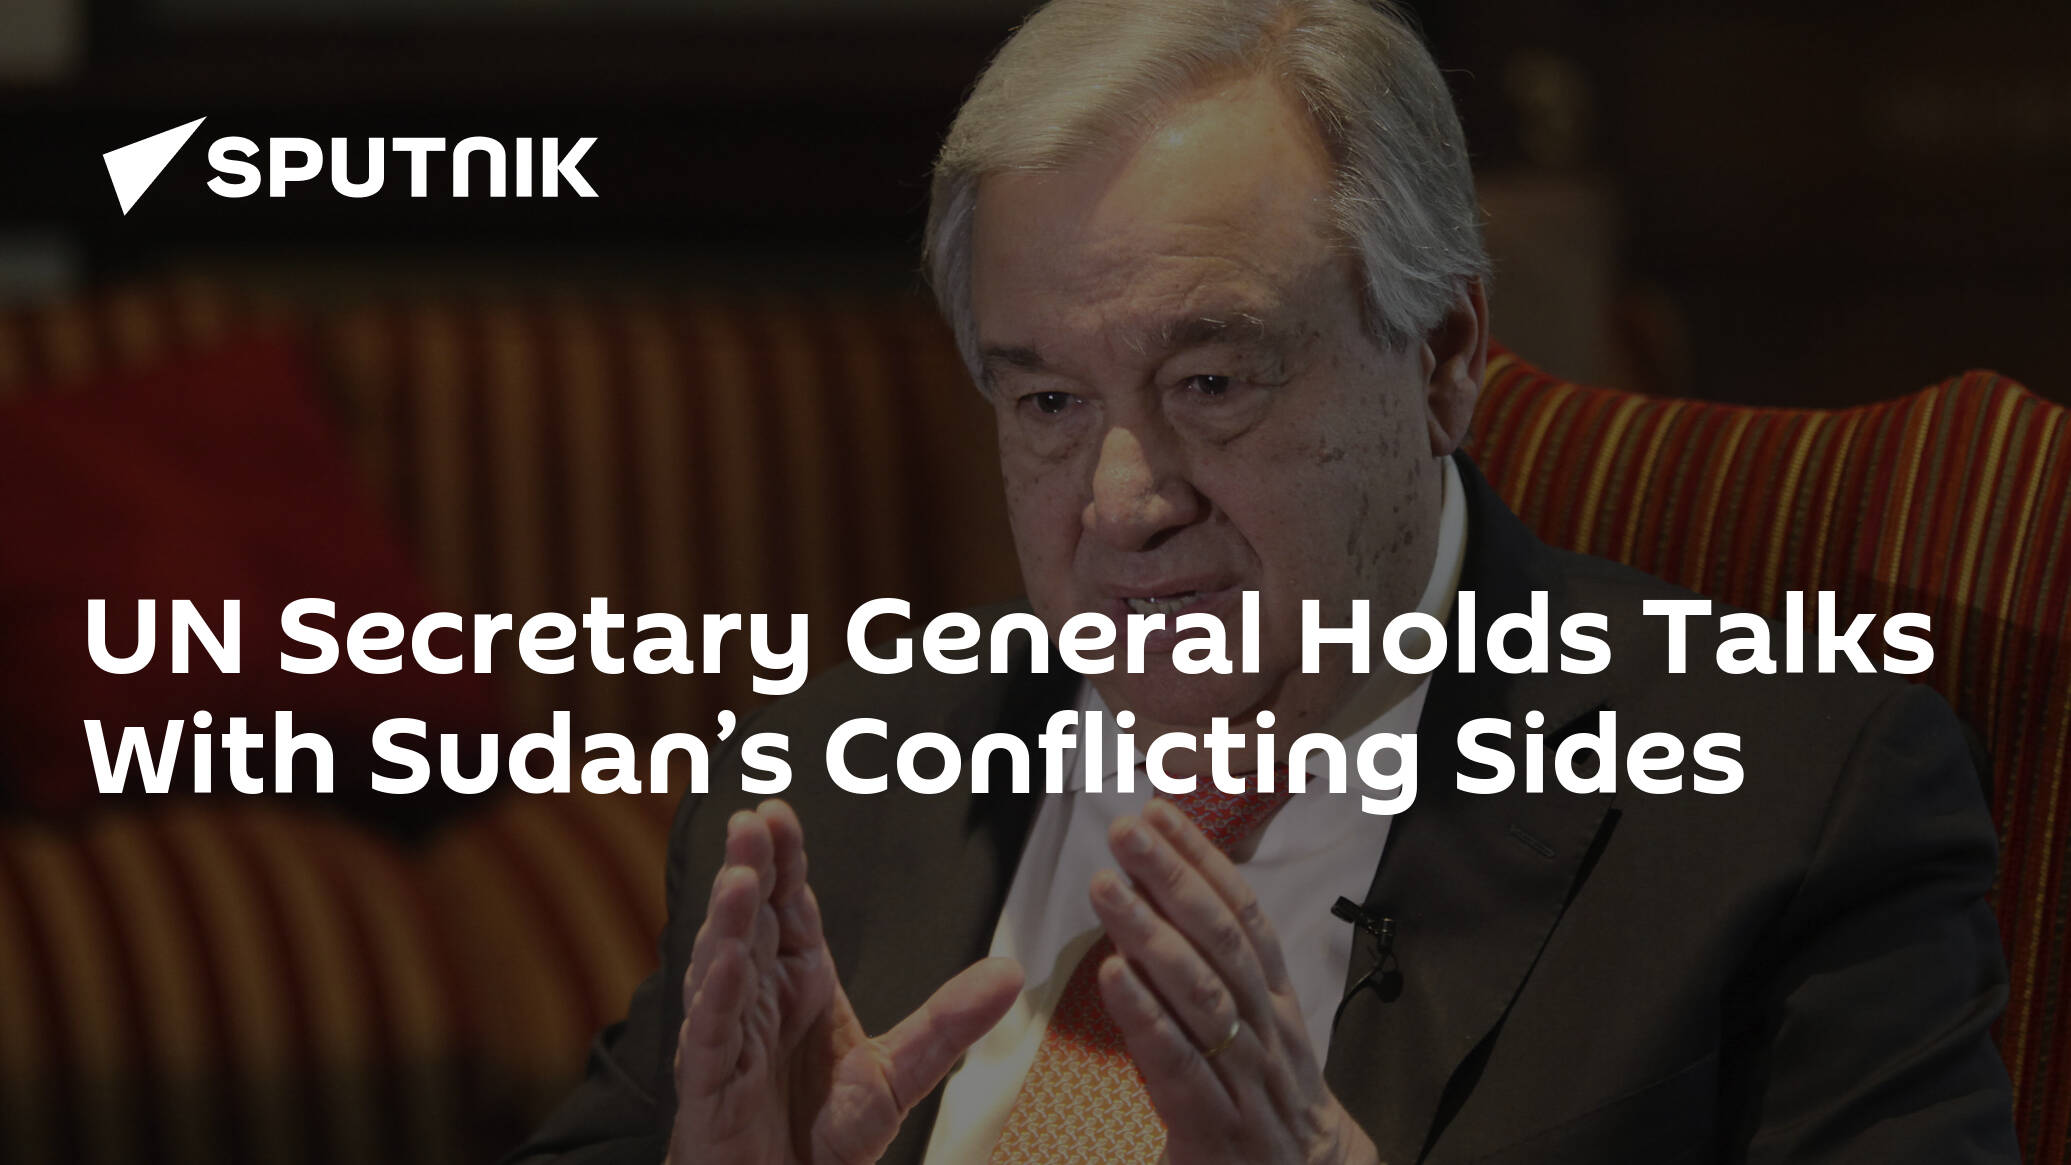 UN Secretary General Holds Talks With Sudan’s Conflicting Sides